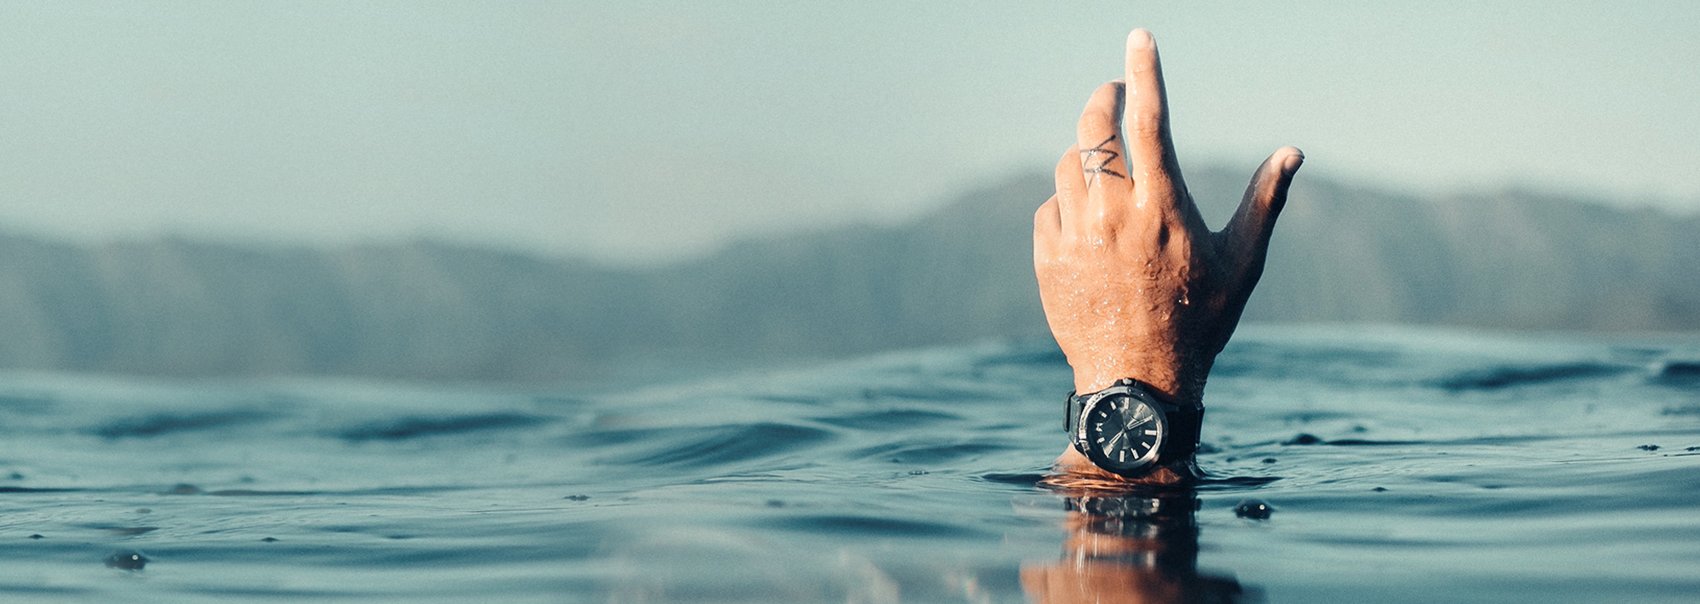 MVMT watch on wrist coming out of ocean